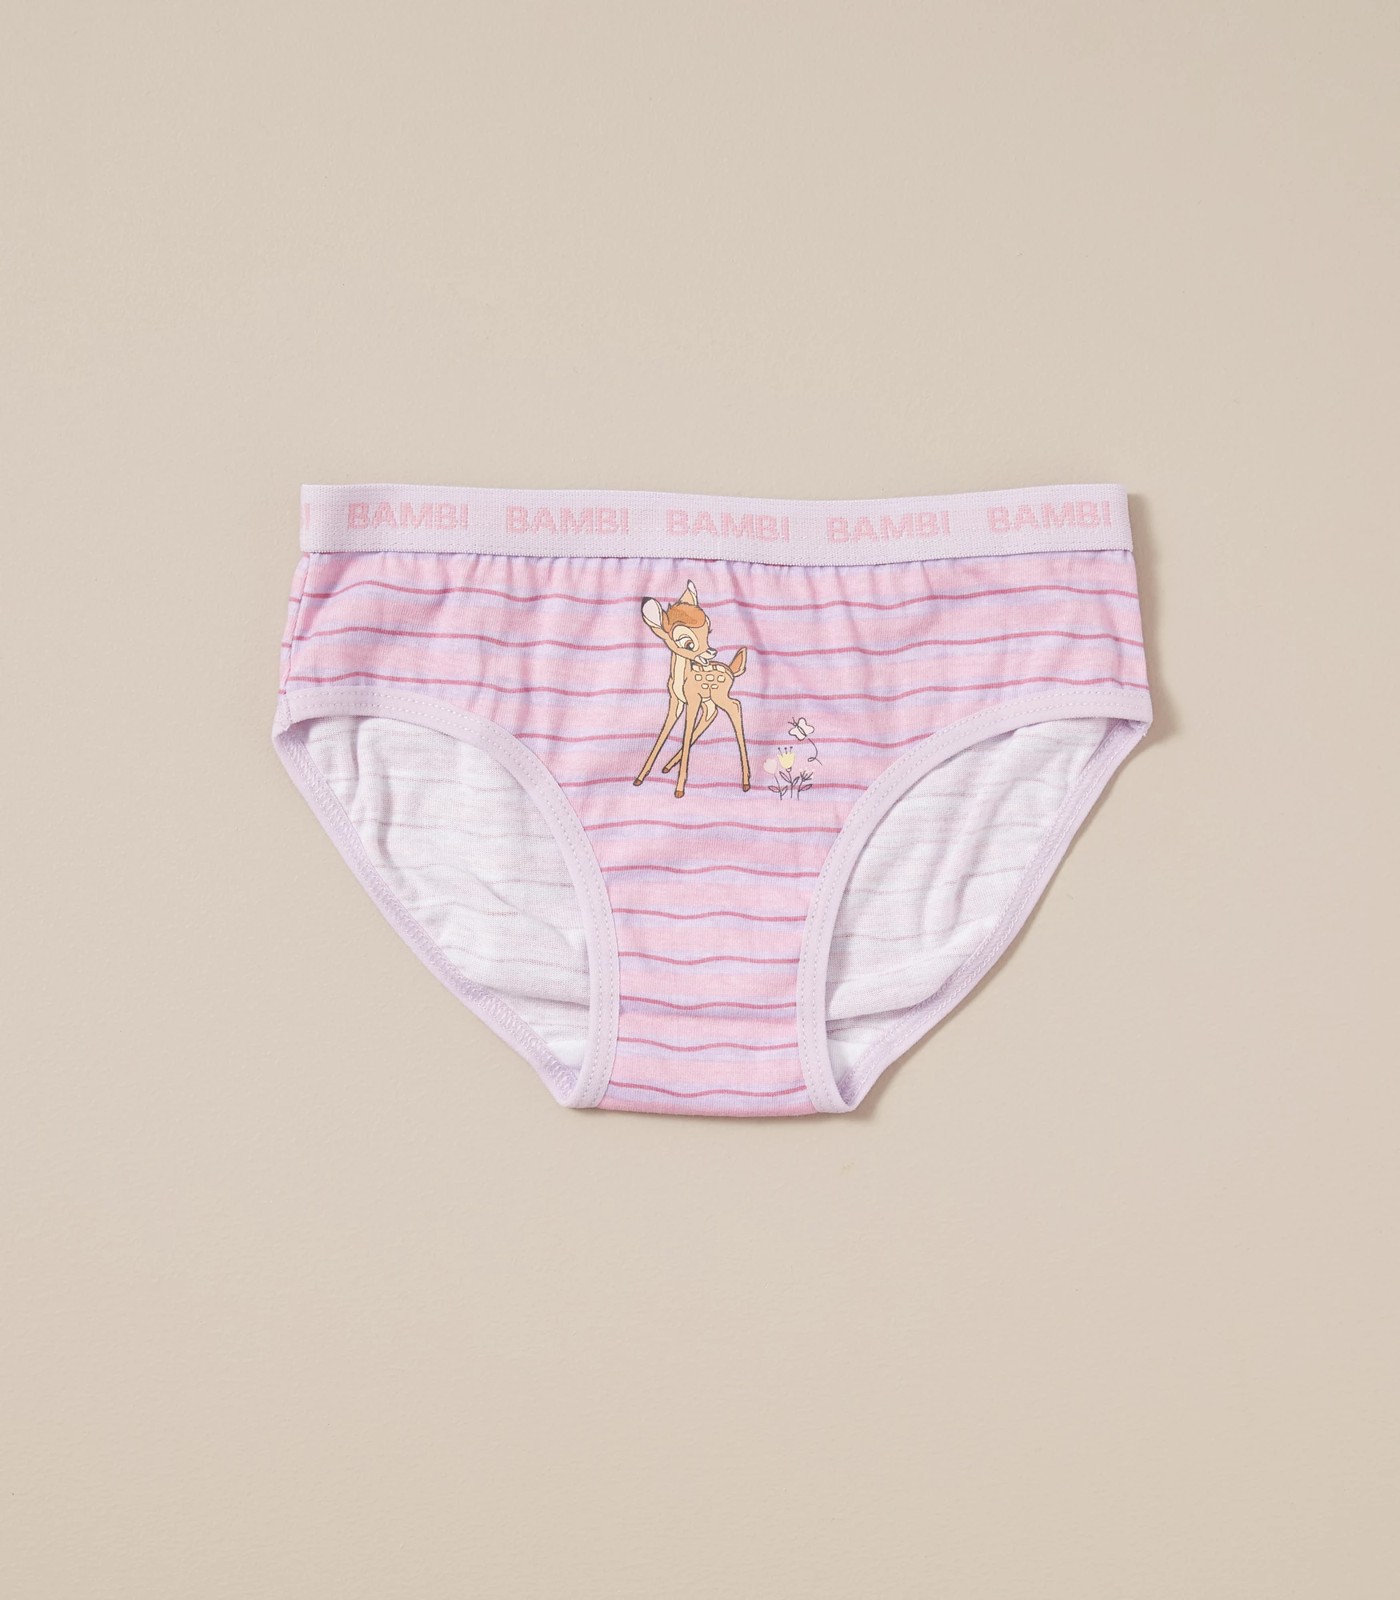 ⋆𝐛𝐚𝐦𝐛𝐢⋆ on X: what color underwear you looking to wear new